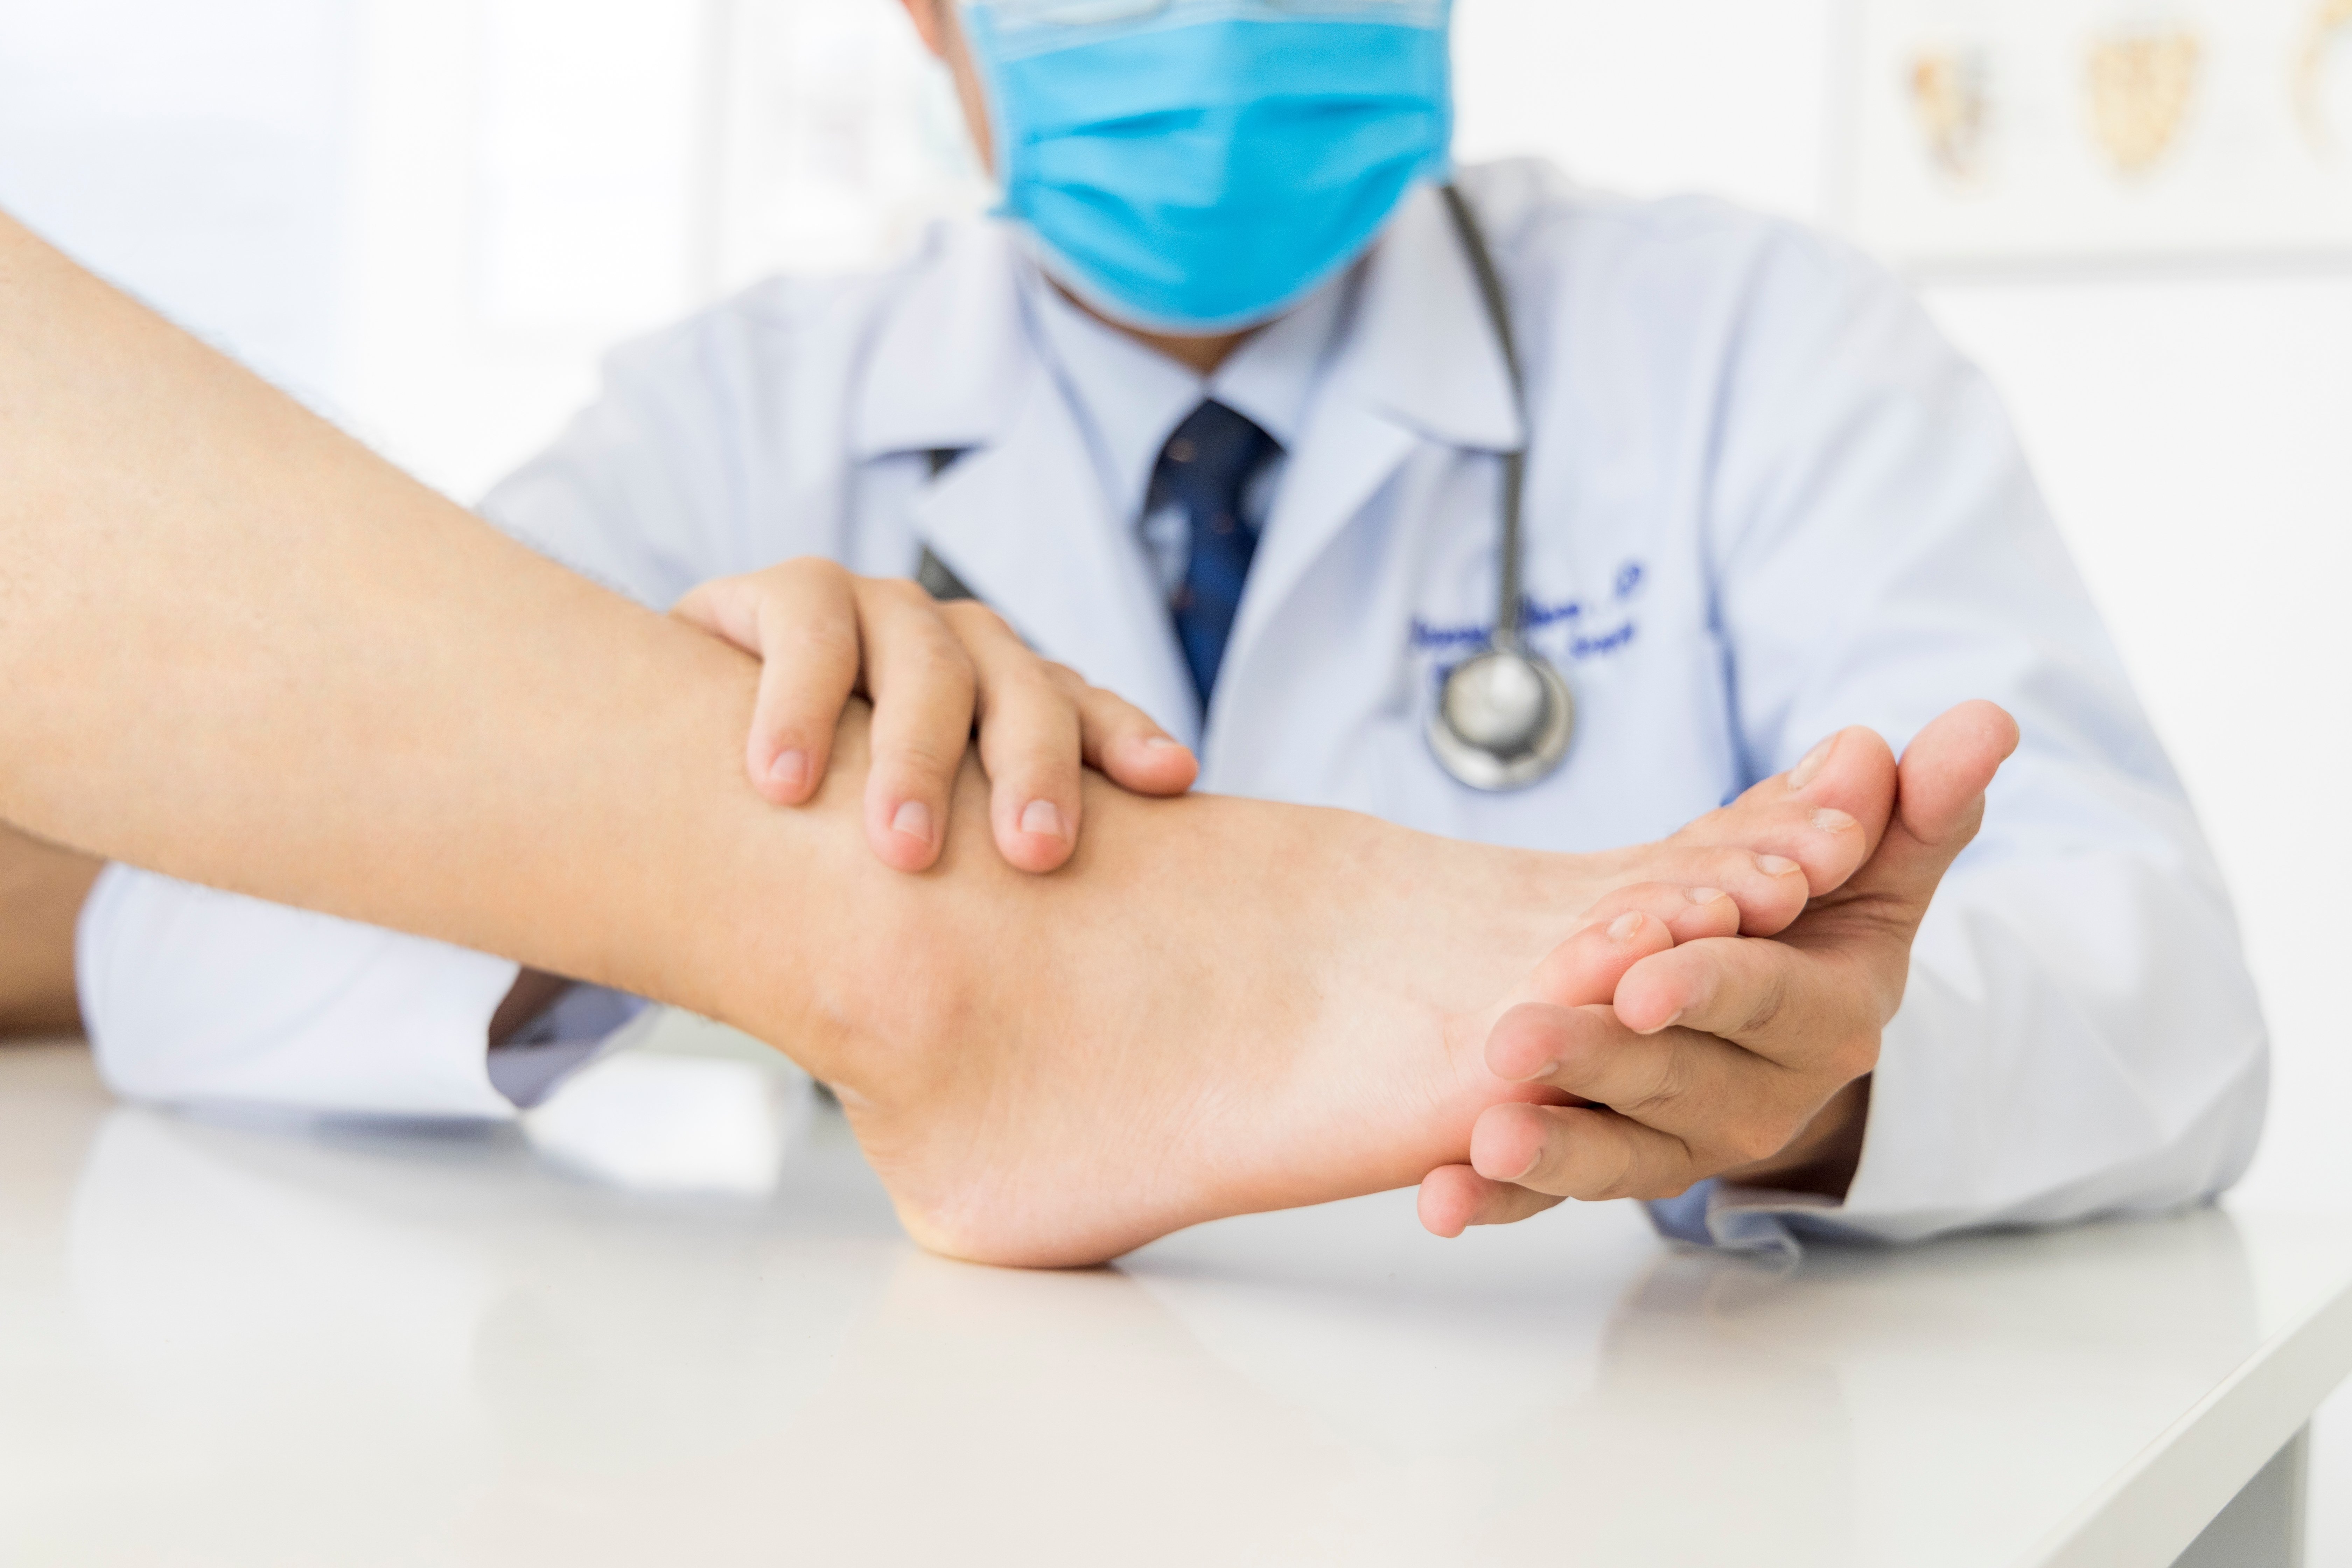 Neuropathy and Foot Care: 5 Tips for Healthy Feet